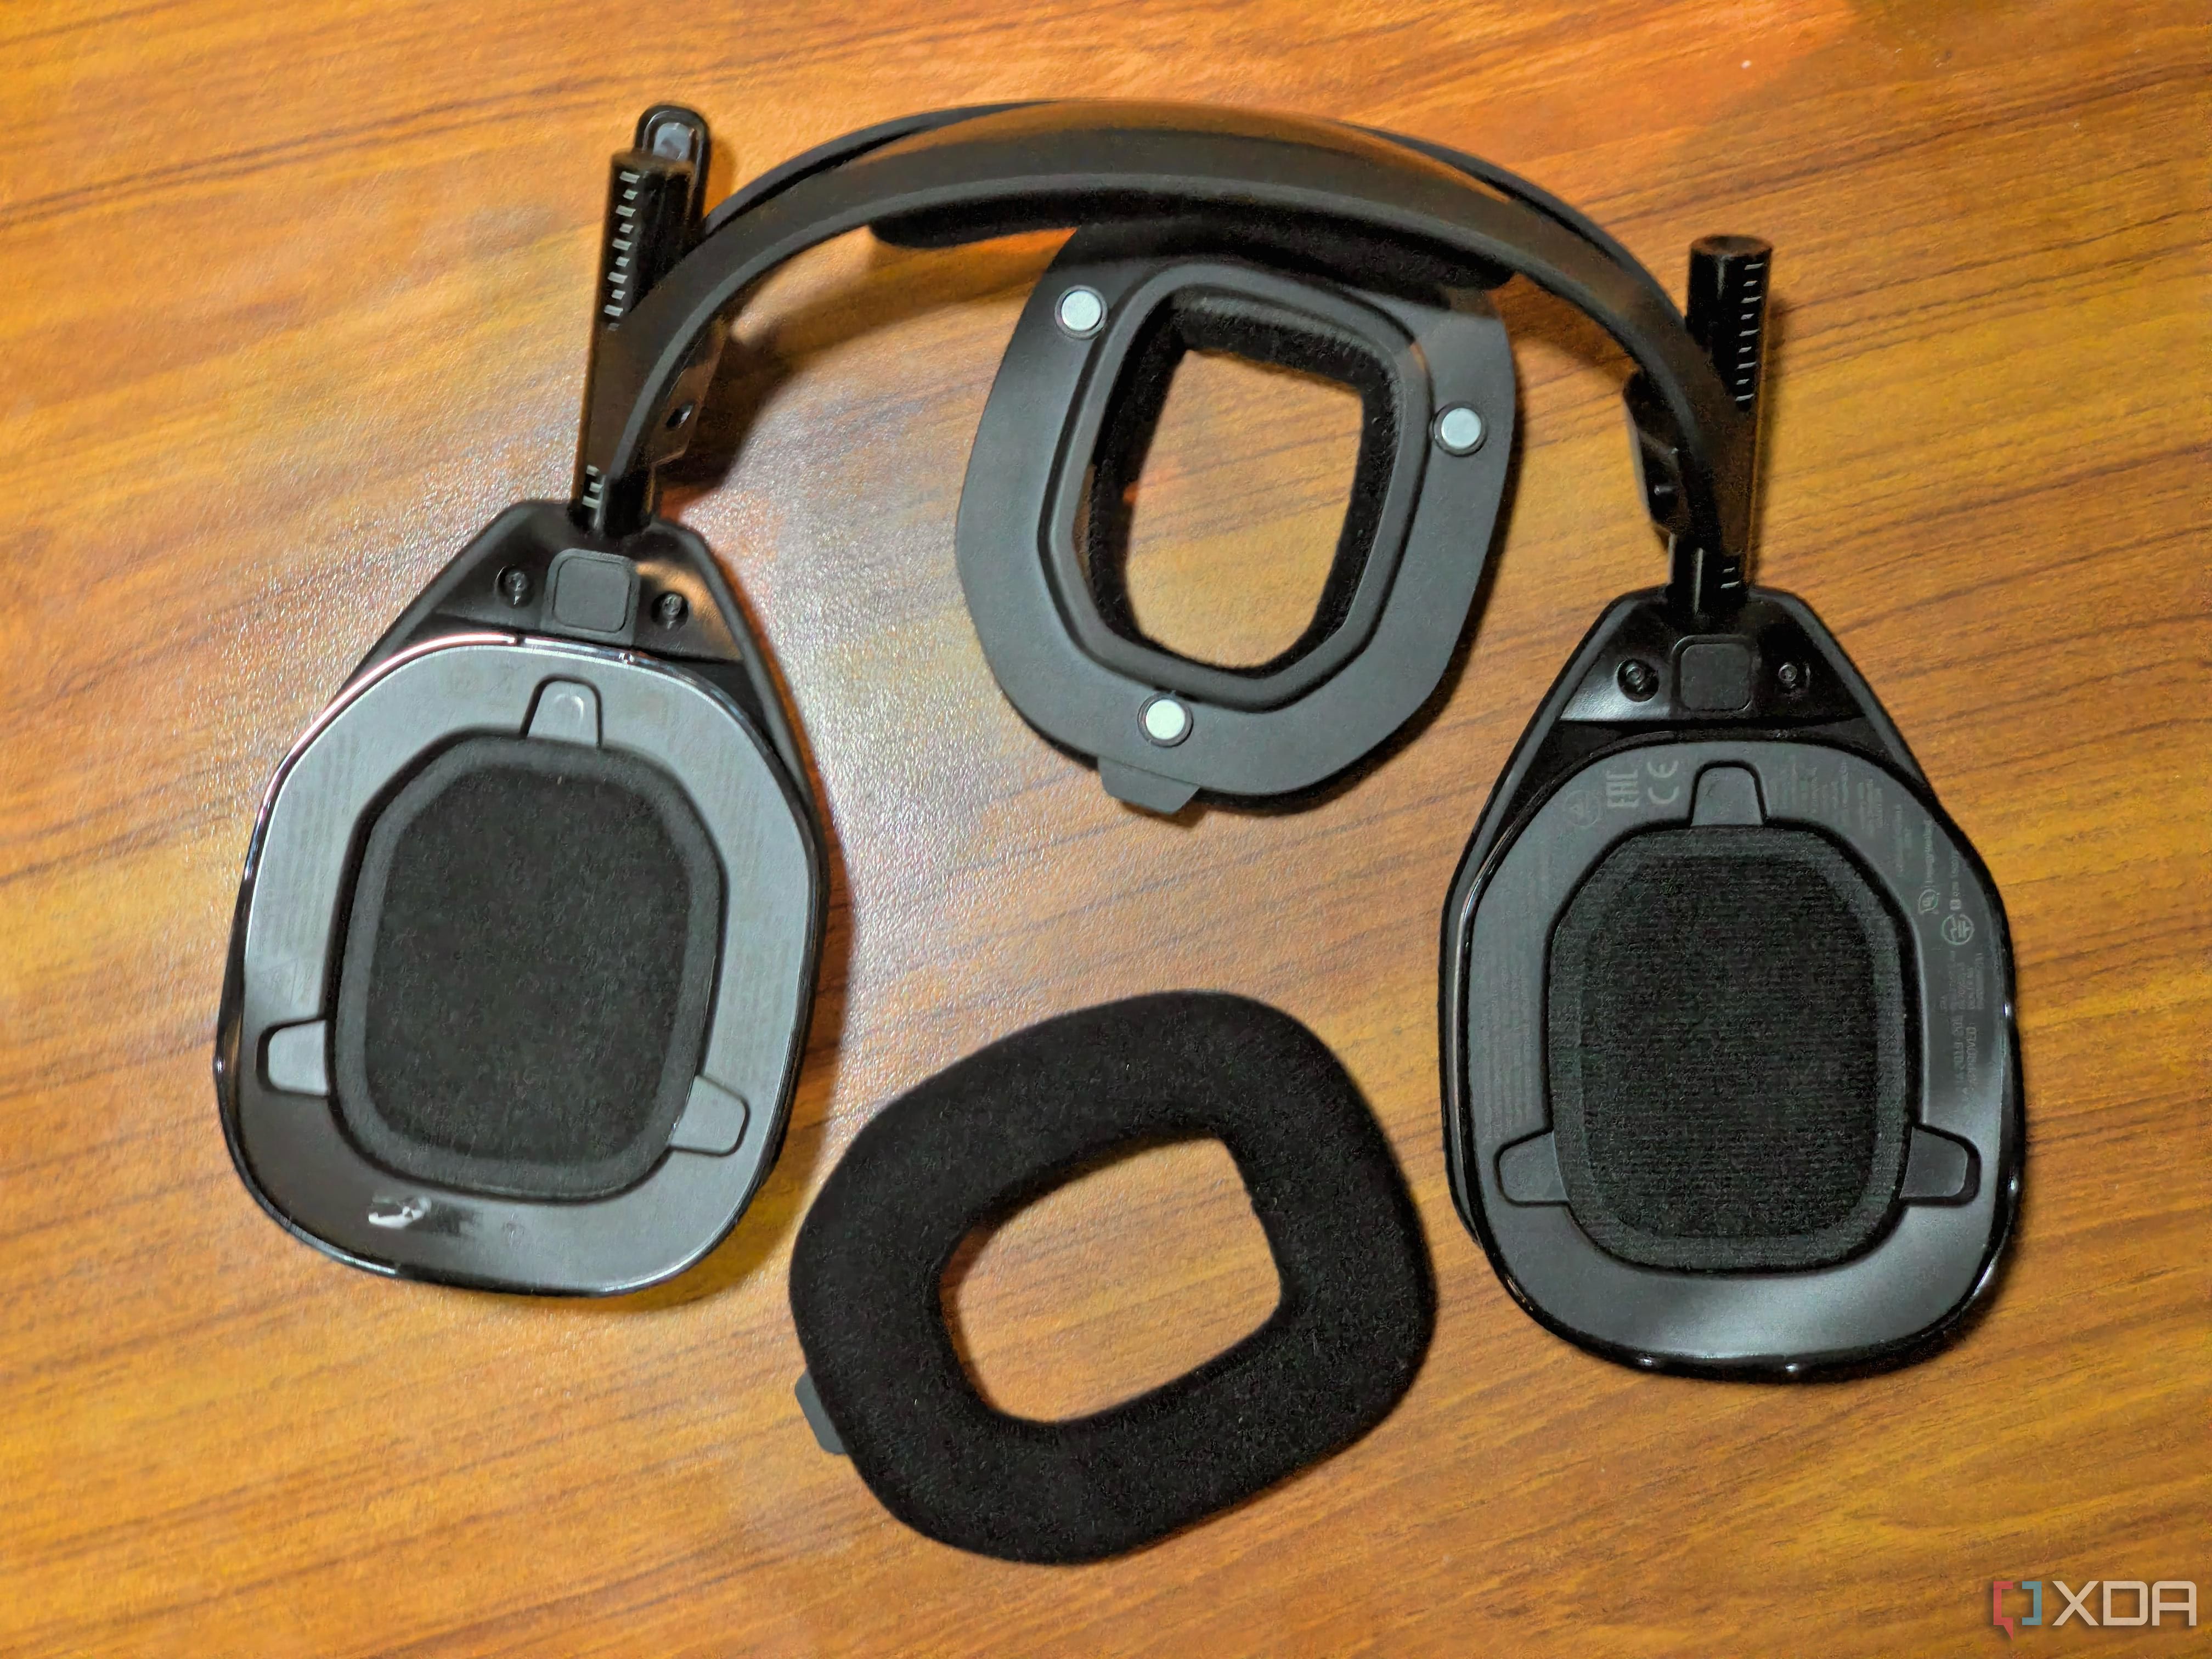 Astro A50 Gen 4 review: a quality all-round gaming headset